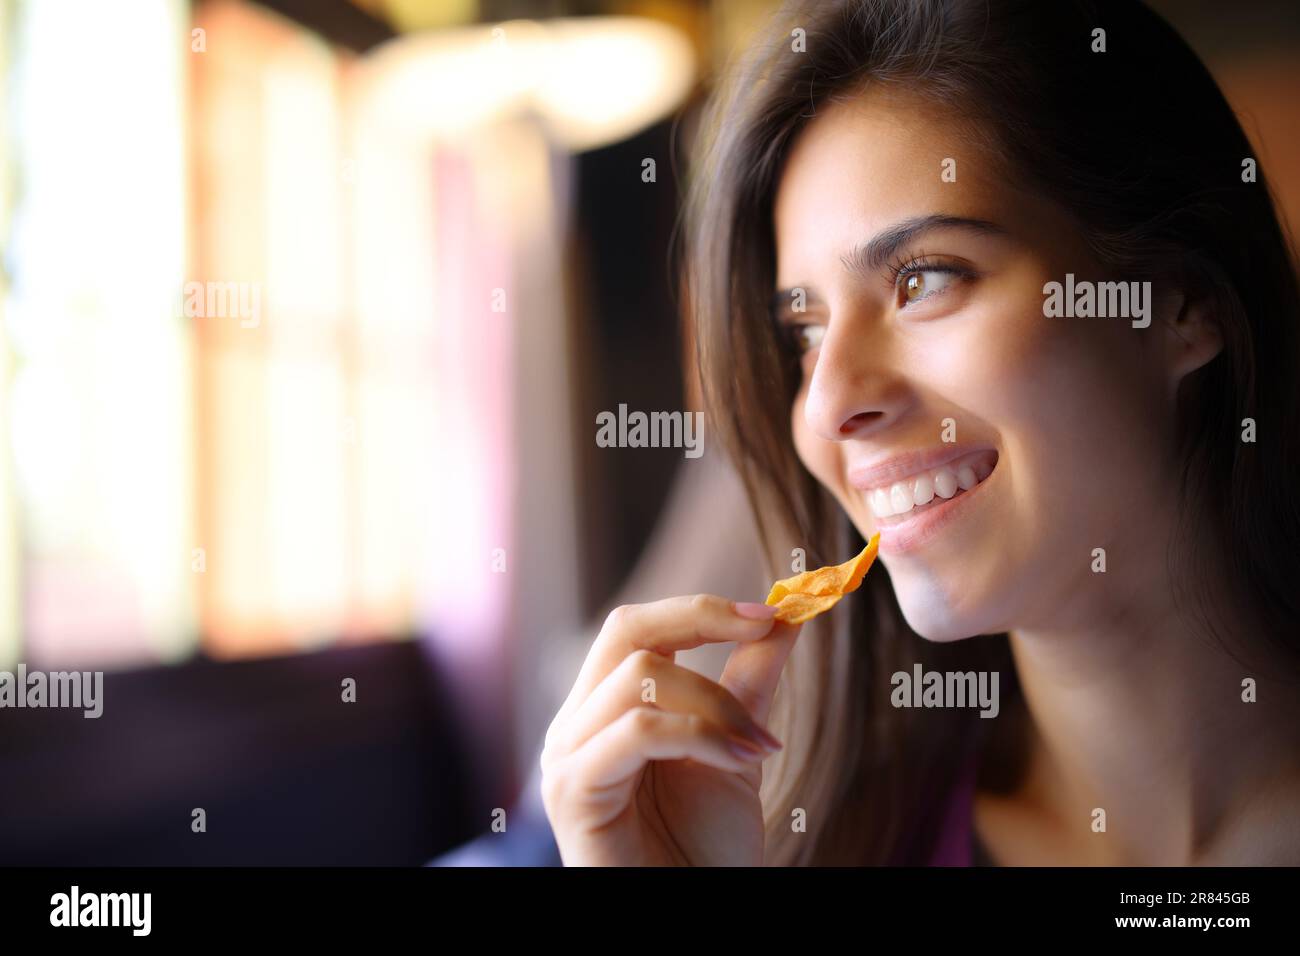 Happy restaurant customer eating chips looks at side through a window Stock Photo